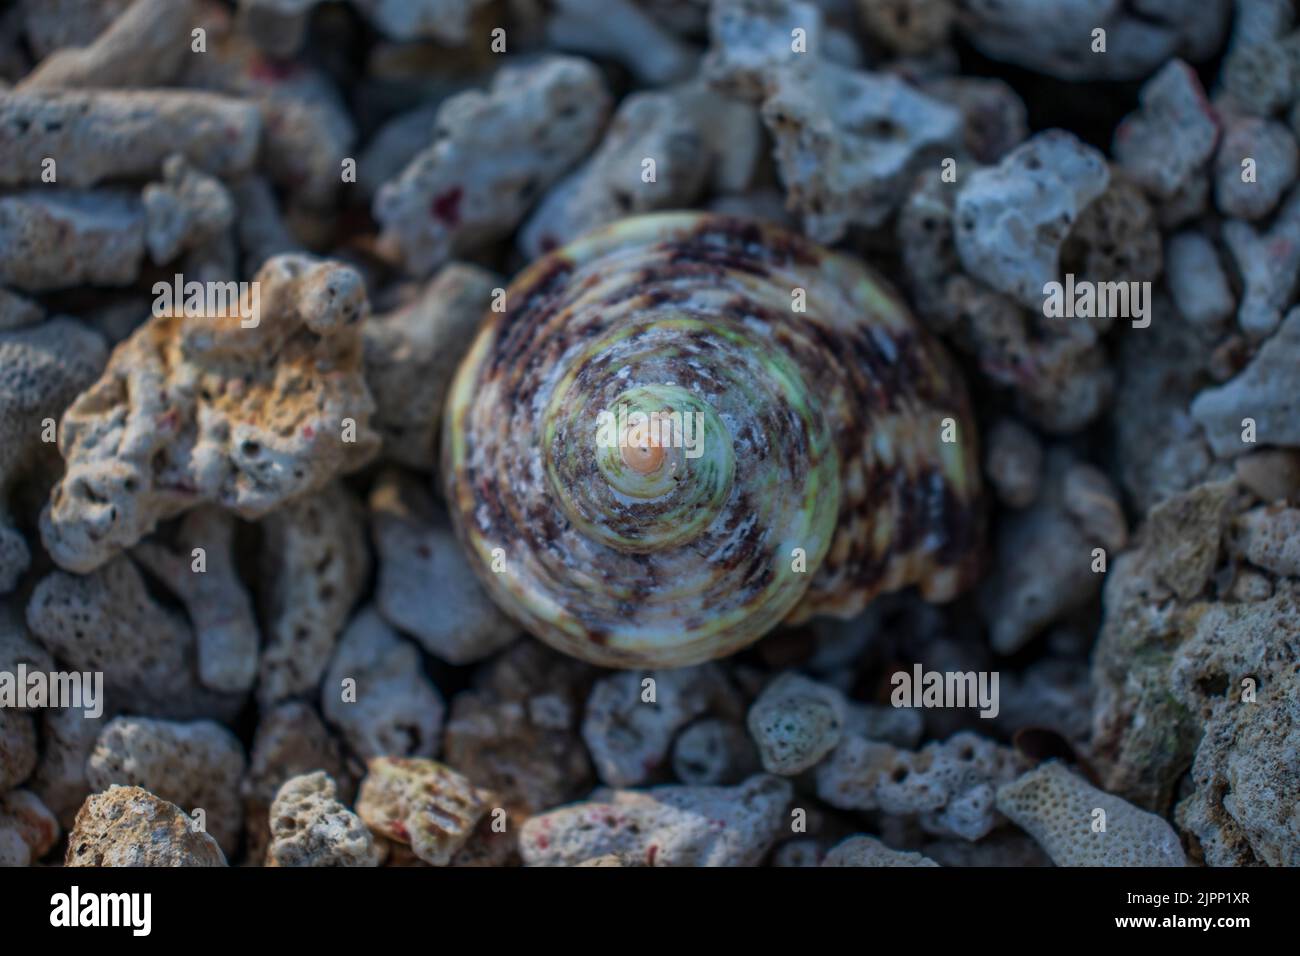 Sea snail shell on the beach, Aceh, Indonesia. Stock Photo